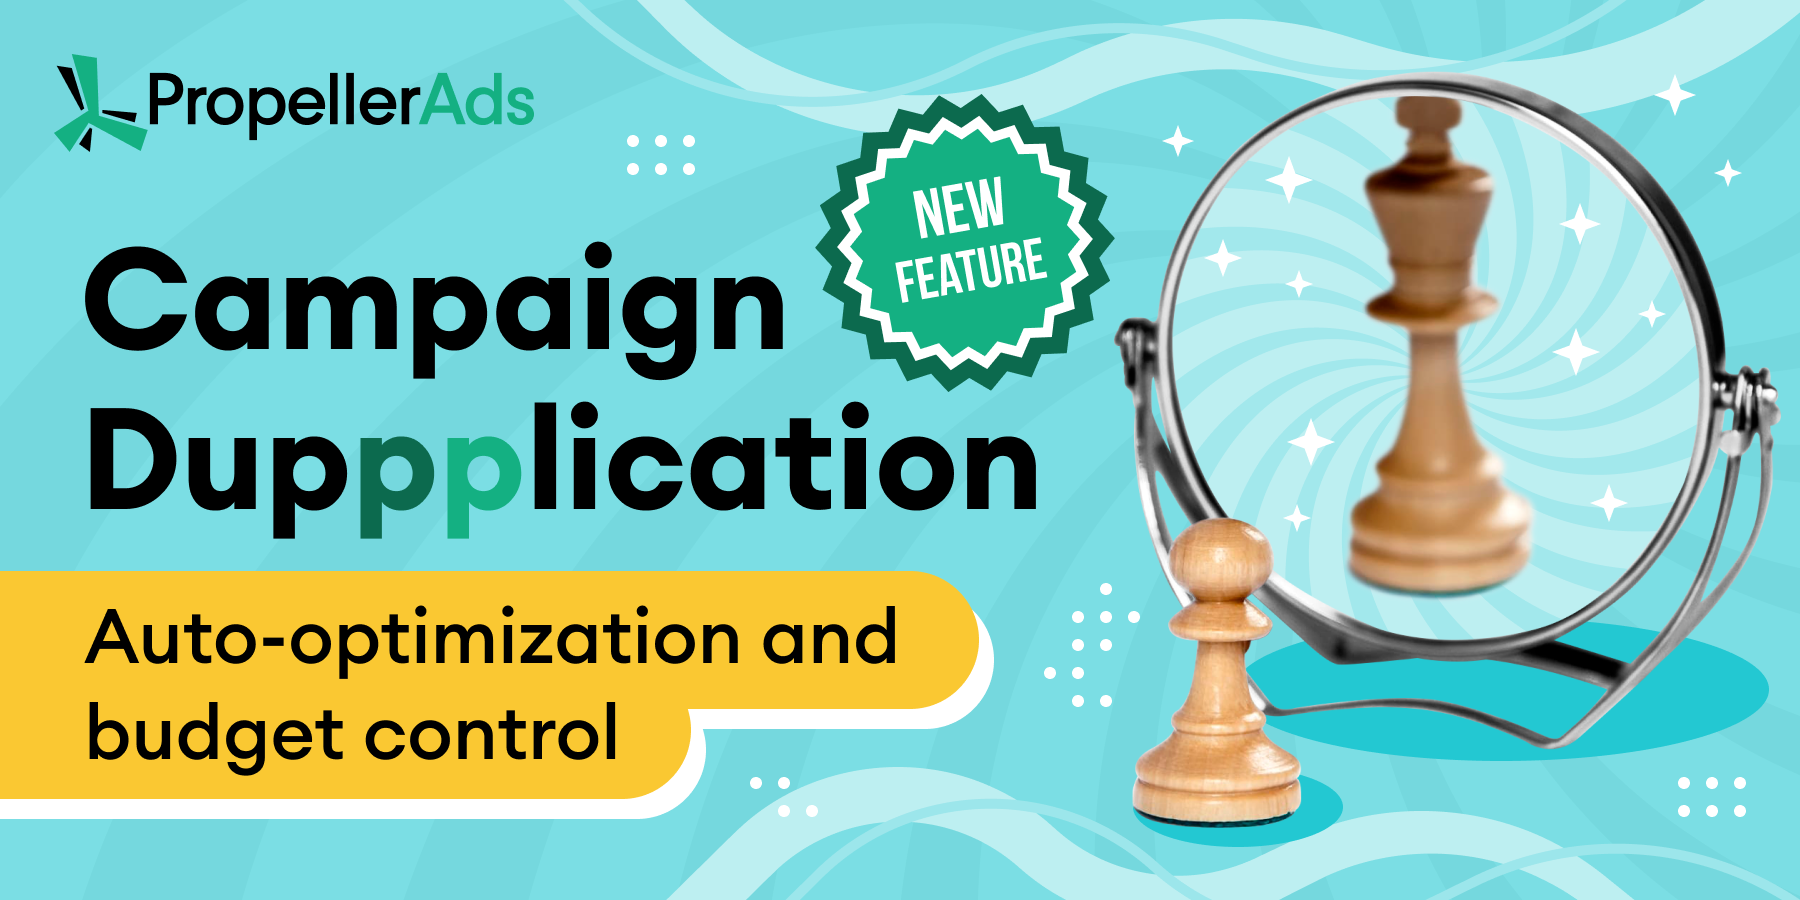 Recently, we added a brand-new feature, Campaign Duplication. As we’ve already told you about campaign duplication, it allows you to get the best available traffic for your campaign effortlessly. Sounds like magic, but this is just PropellerAds technology — big data, machine learning, and savvy specialists combo.  We won’t bother you with all this boring technical